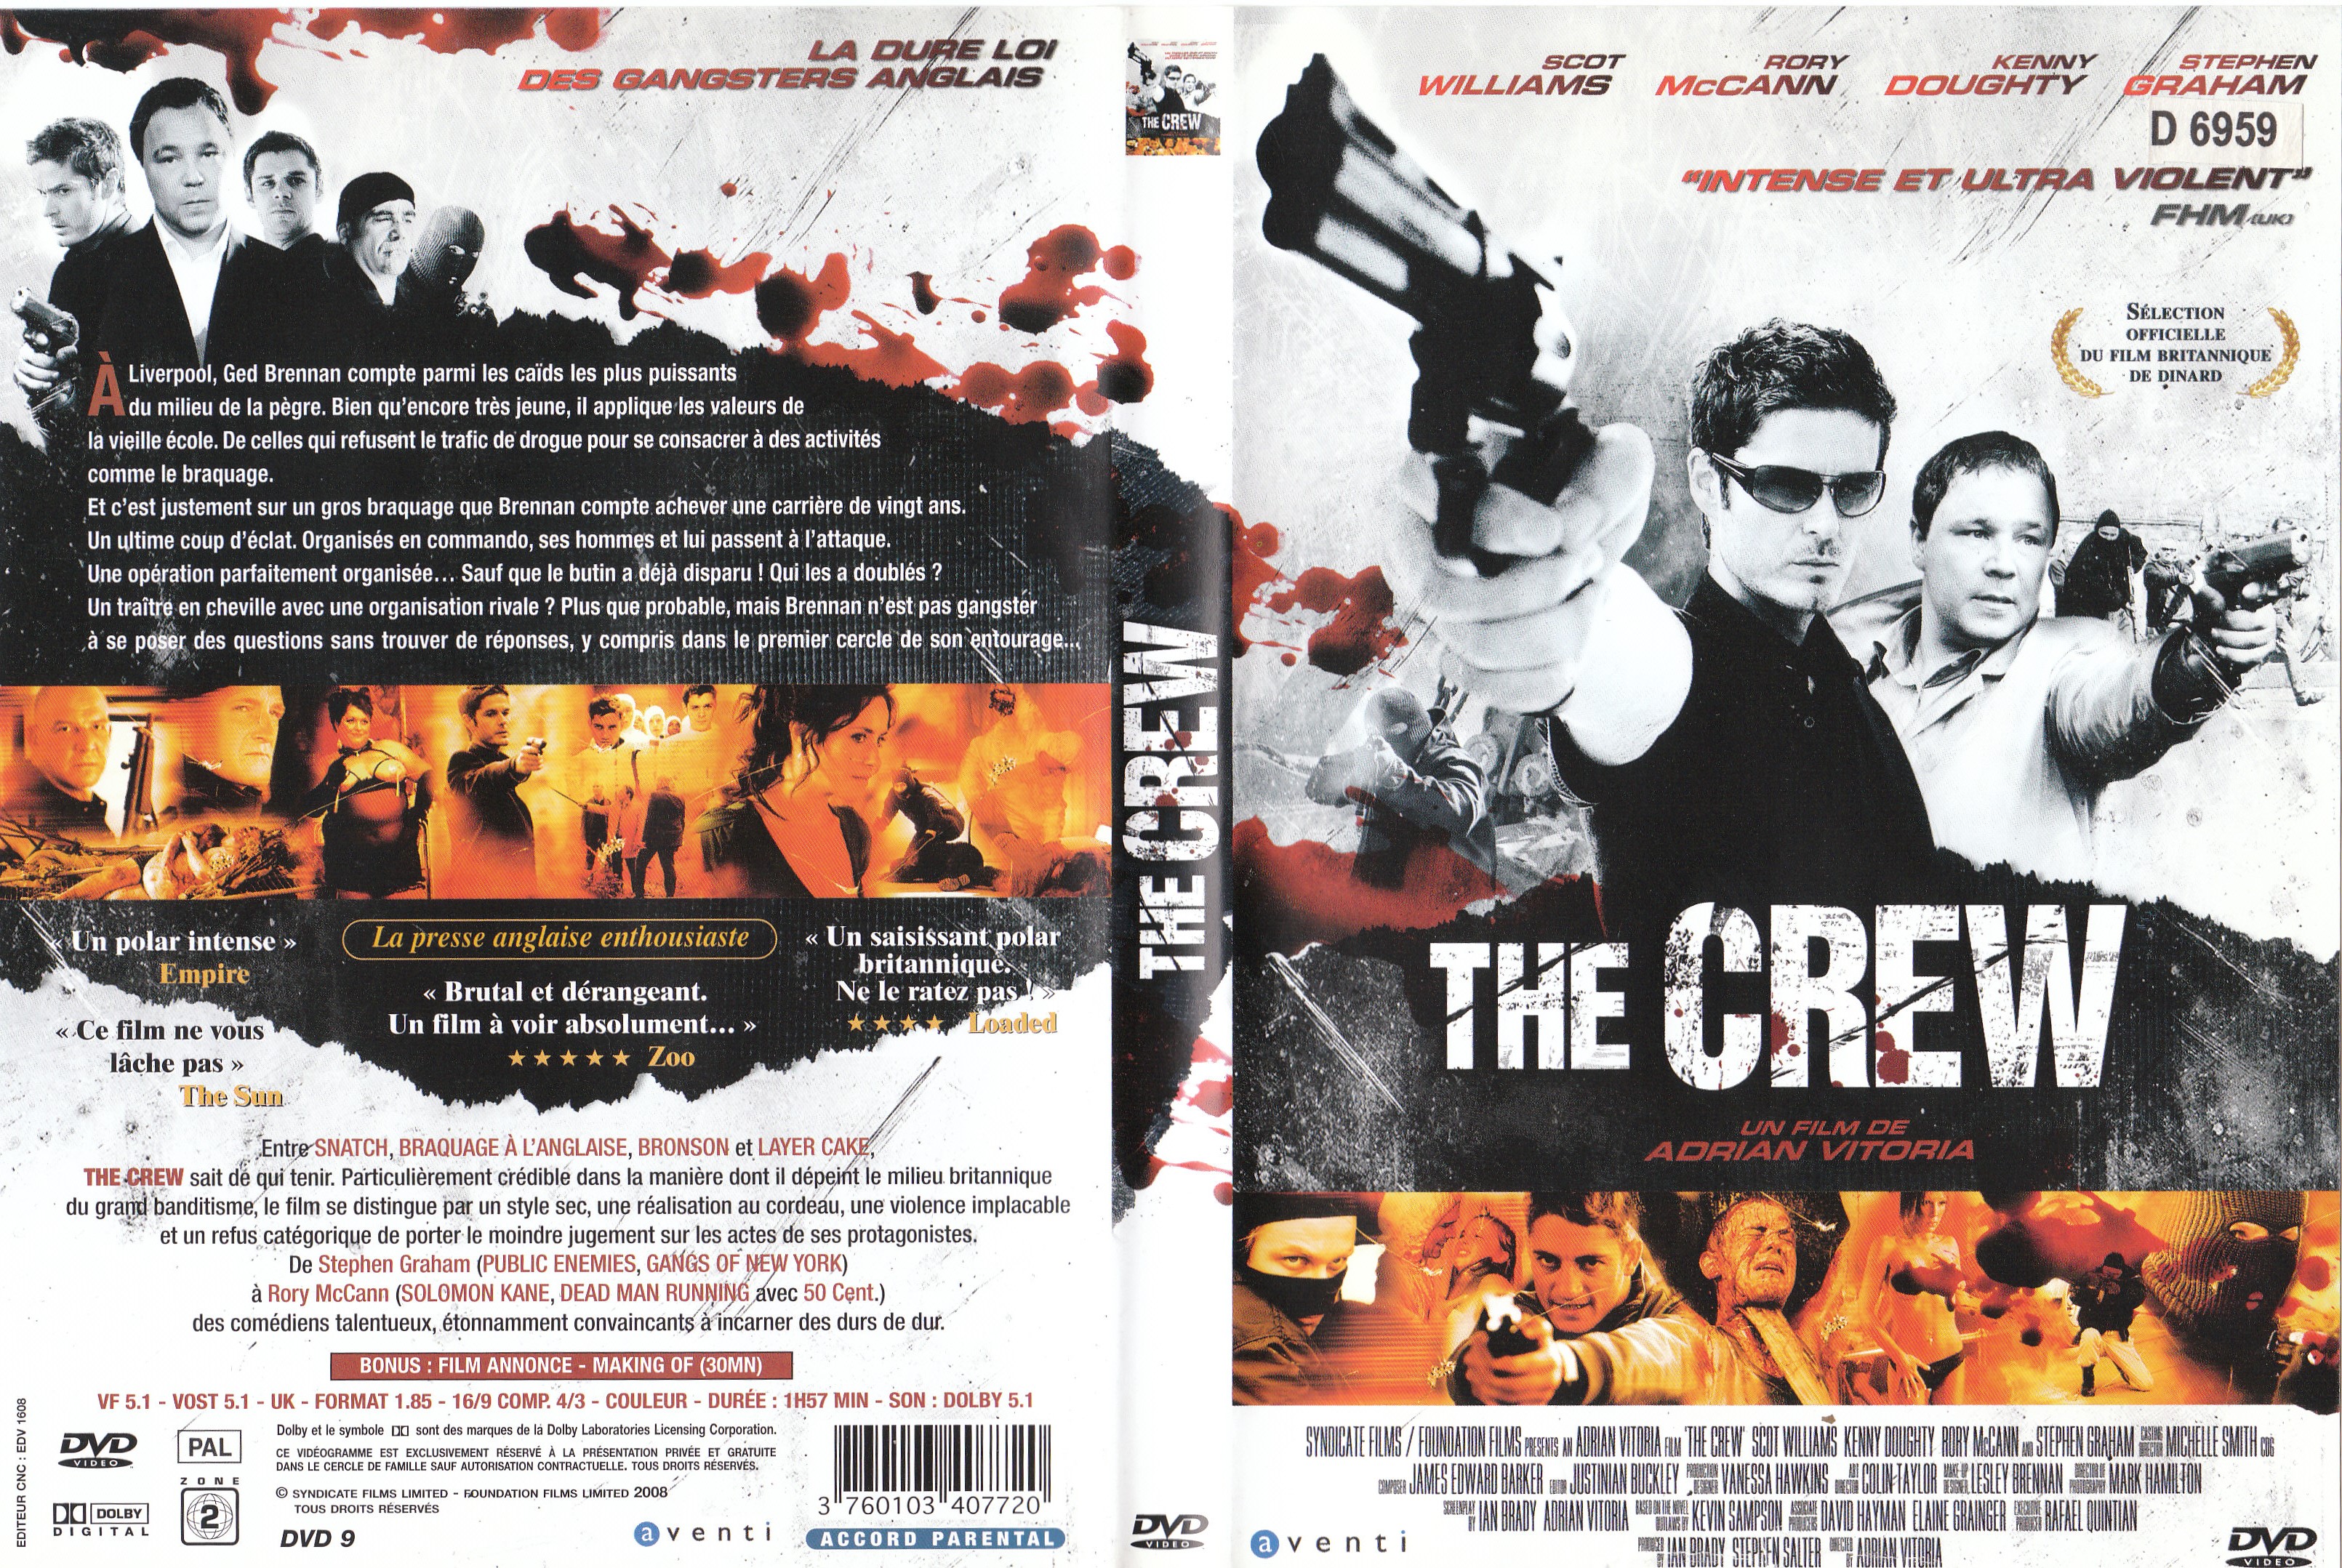 Jaquette DVD The Crew